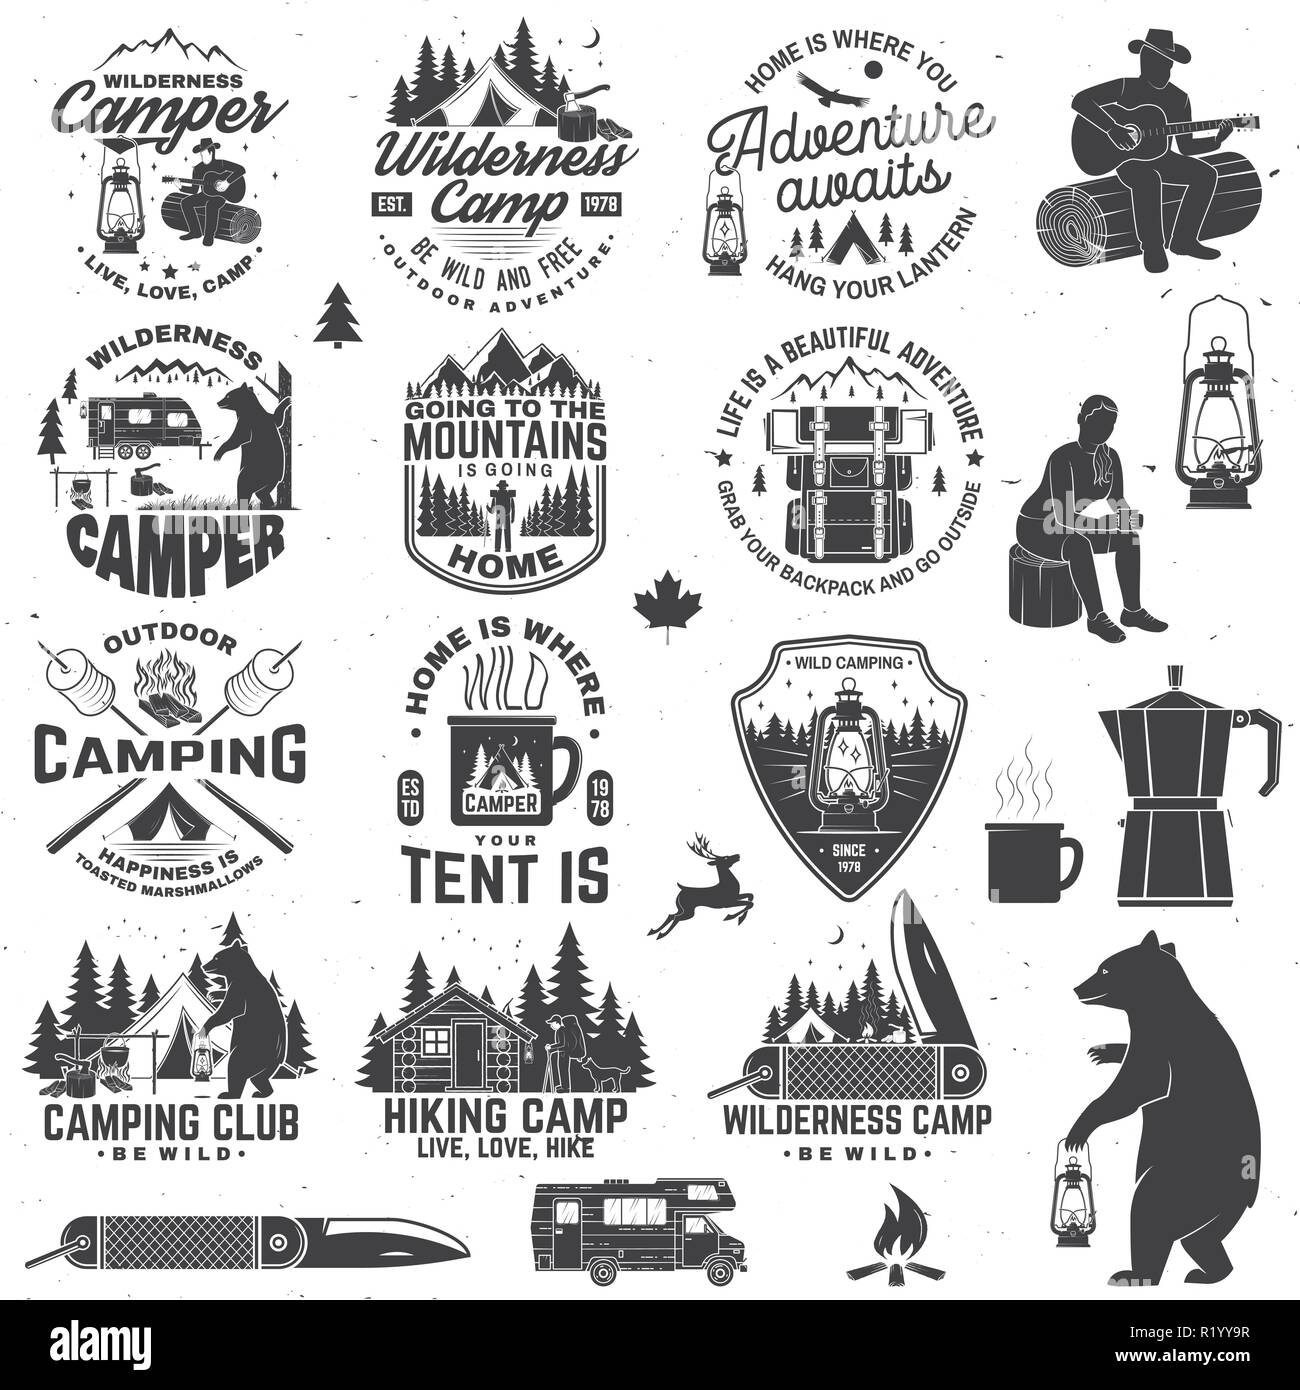 Wilderness camp. Be wild and free. Vector. Concept for badge, shirt or logo, print, stamp, patch or tee Vintage typography design with trailer, tent, campfire, bear, pocket knife and forest silhouette Stock Vector